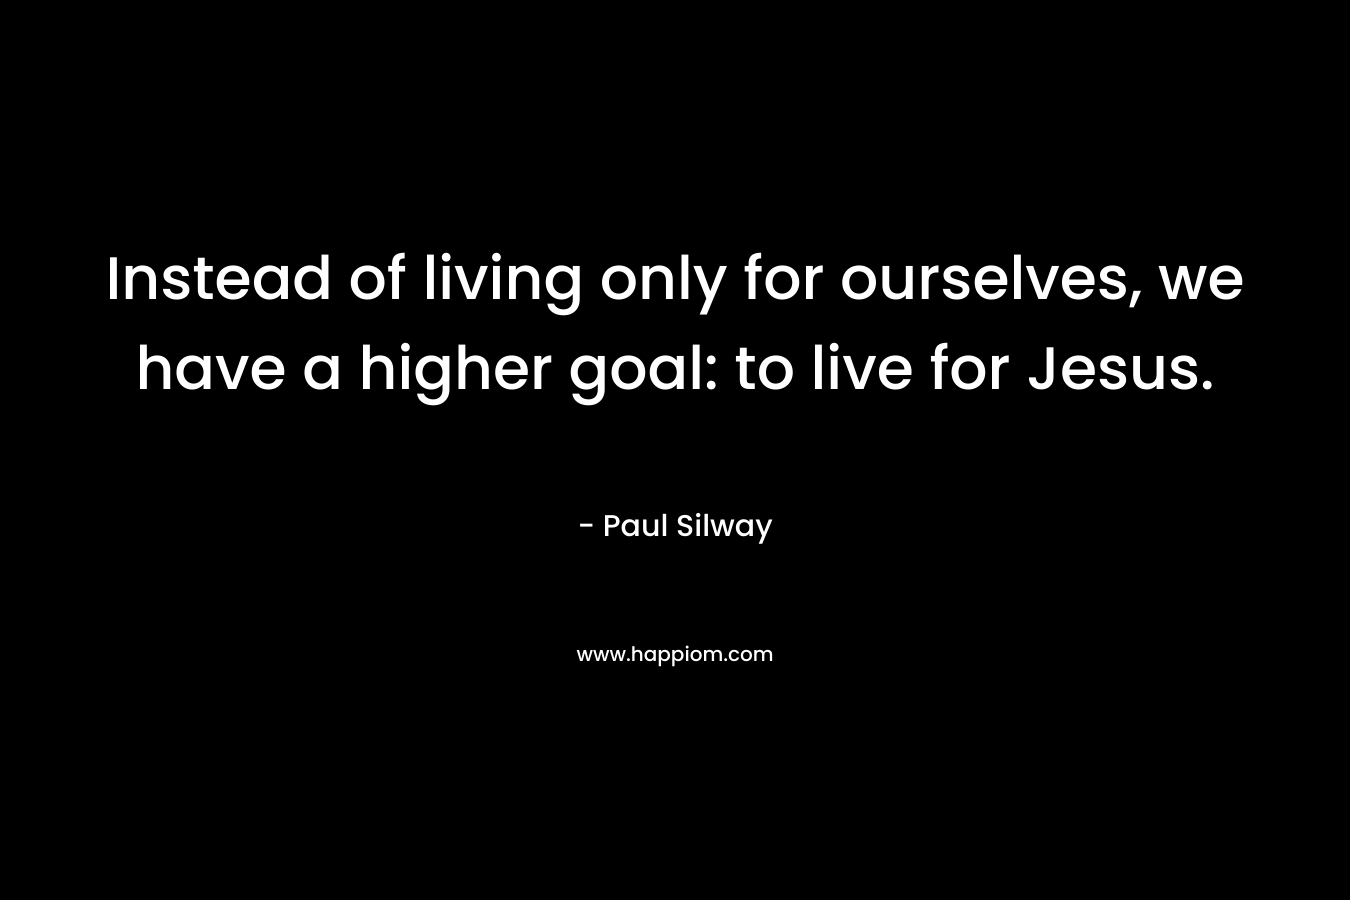 Instead of living only for ourselves, we have a higher goal: to live for Jesus. – Paul Silway